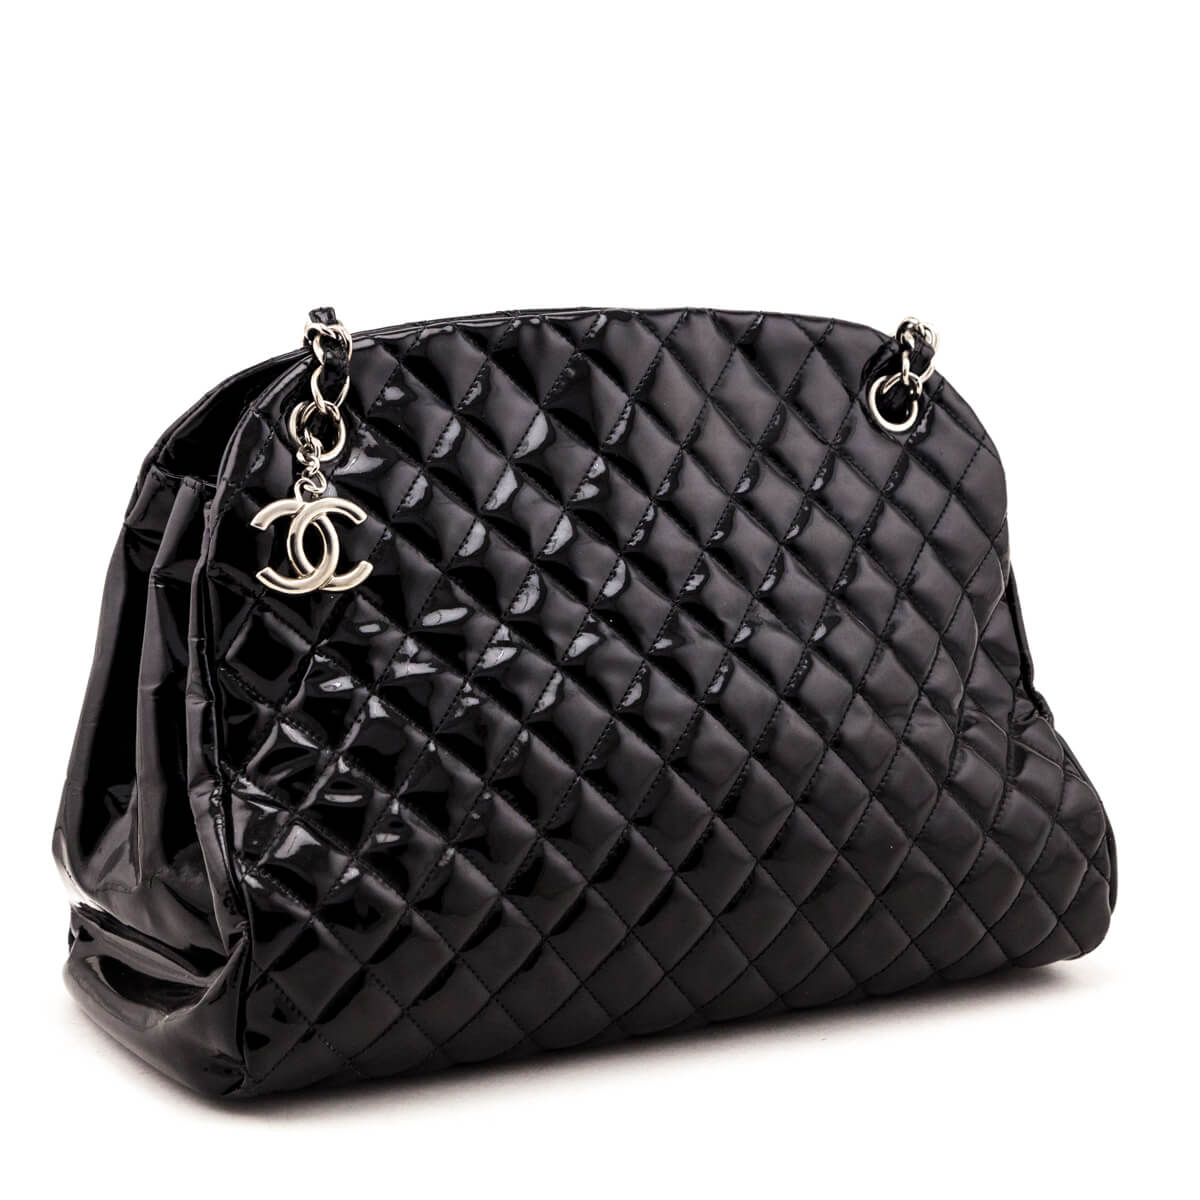 Chanel bag in patent leather second hand Lysis